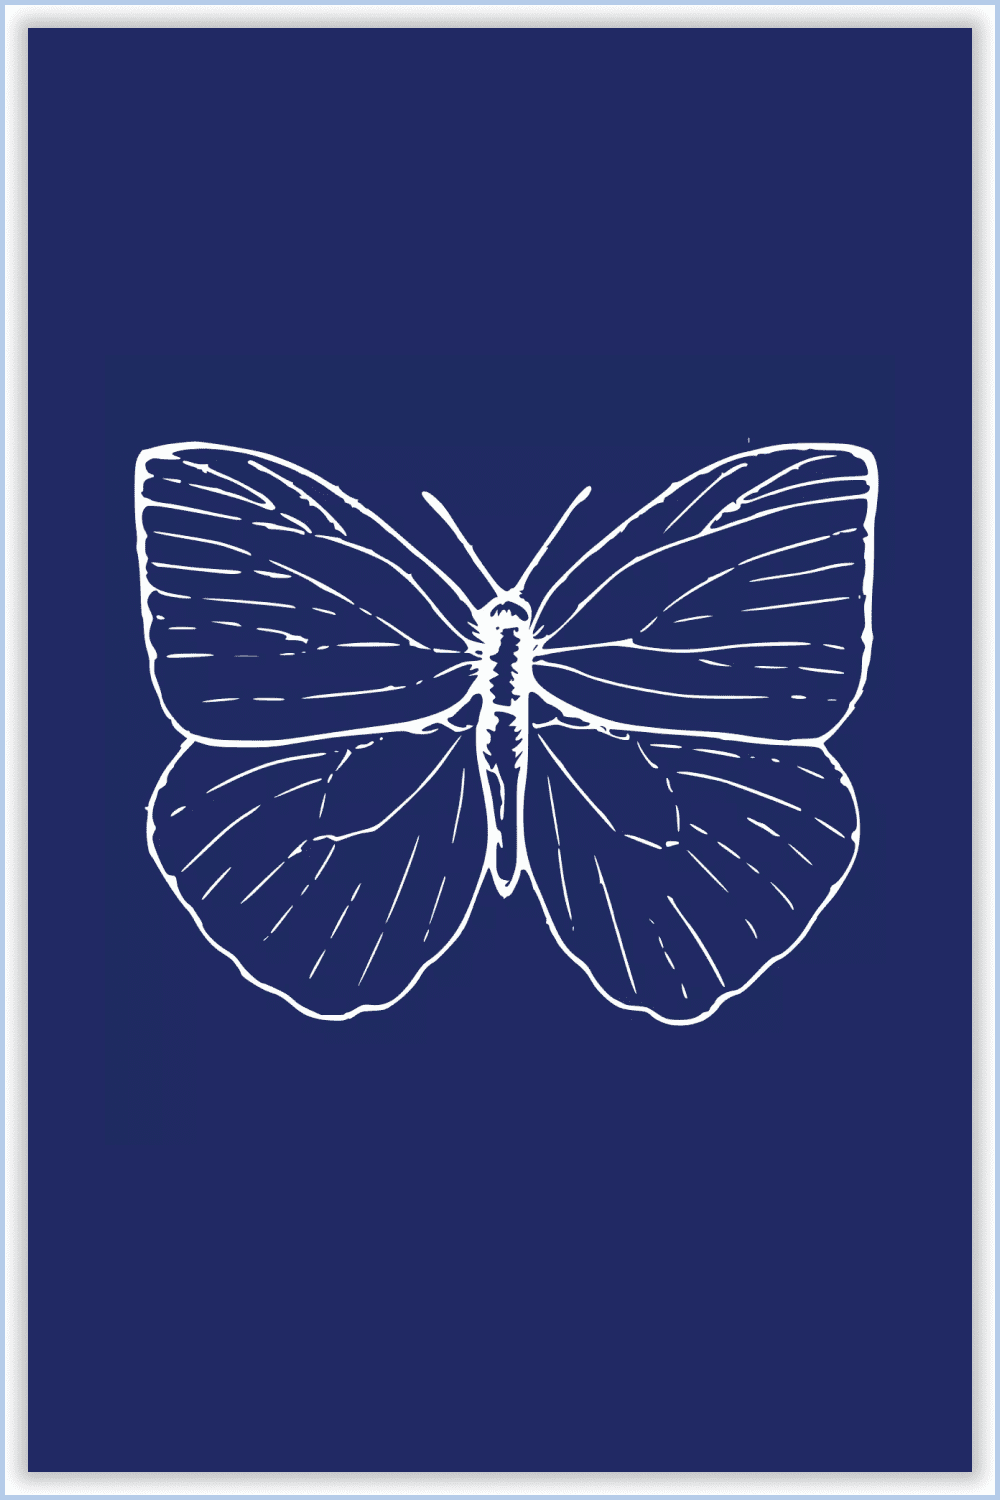 Butterfly with long whiskers and spread wings on a blue background.